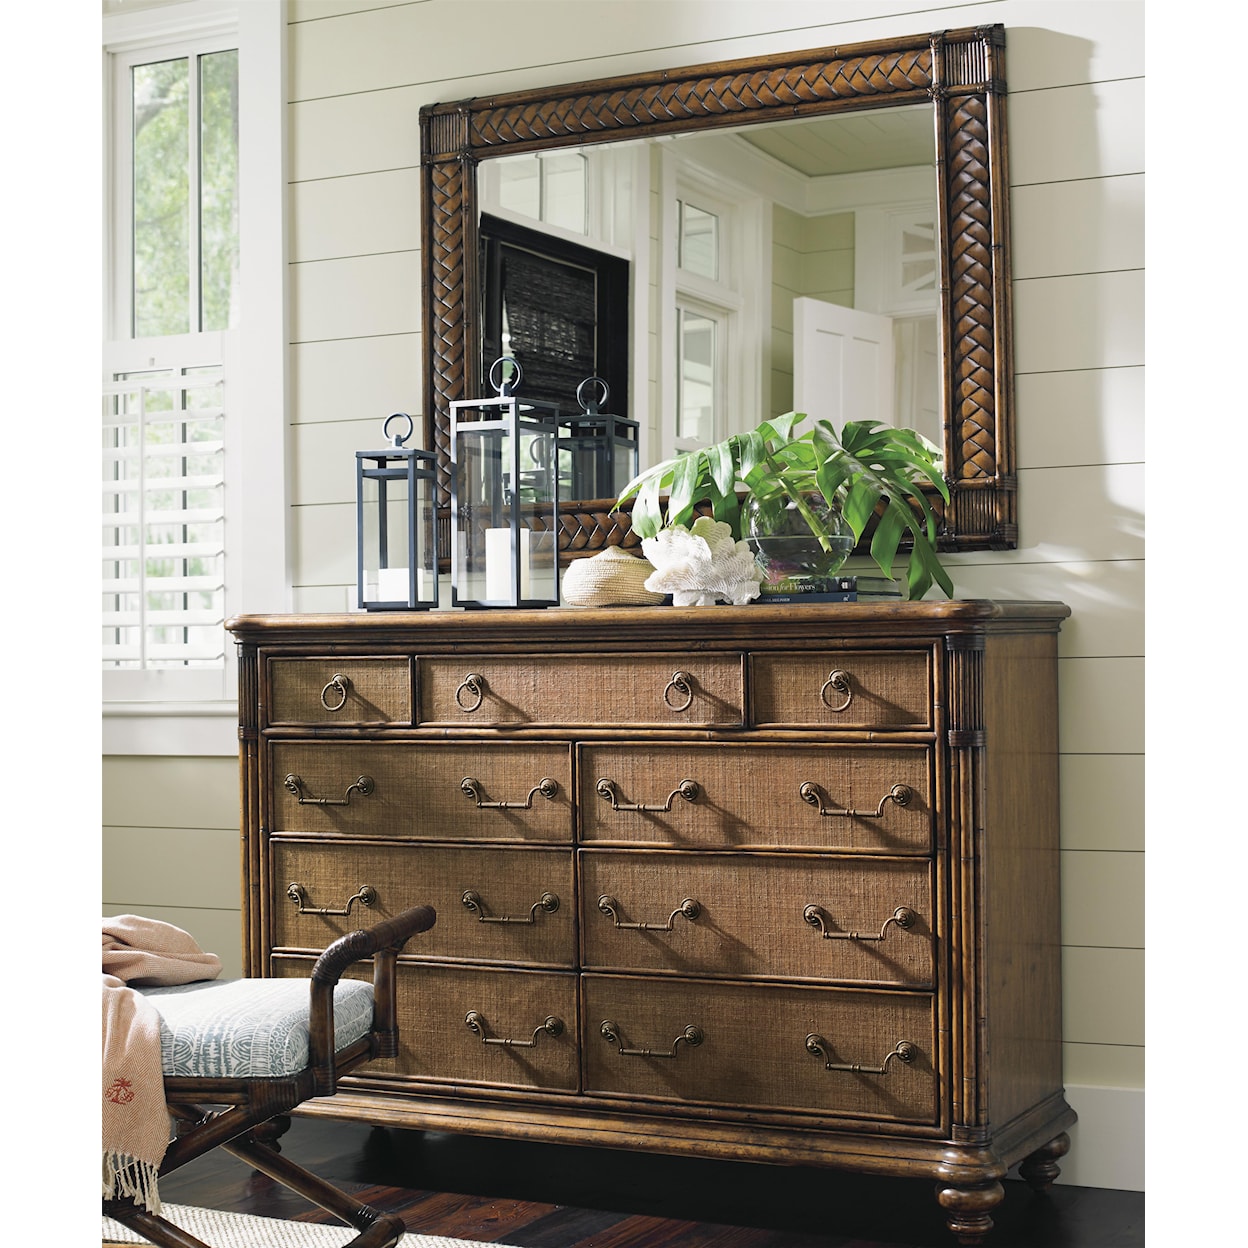 Tommy Bahama Home Bali Hai Breakers Double Dresser and Mirror Set